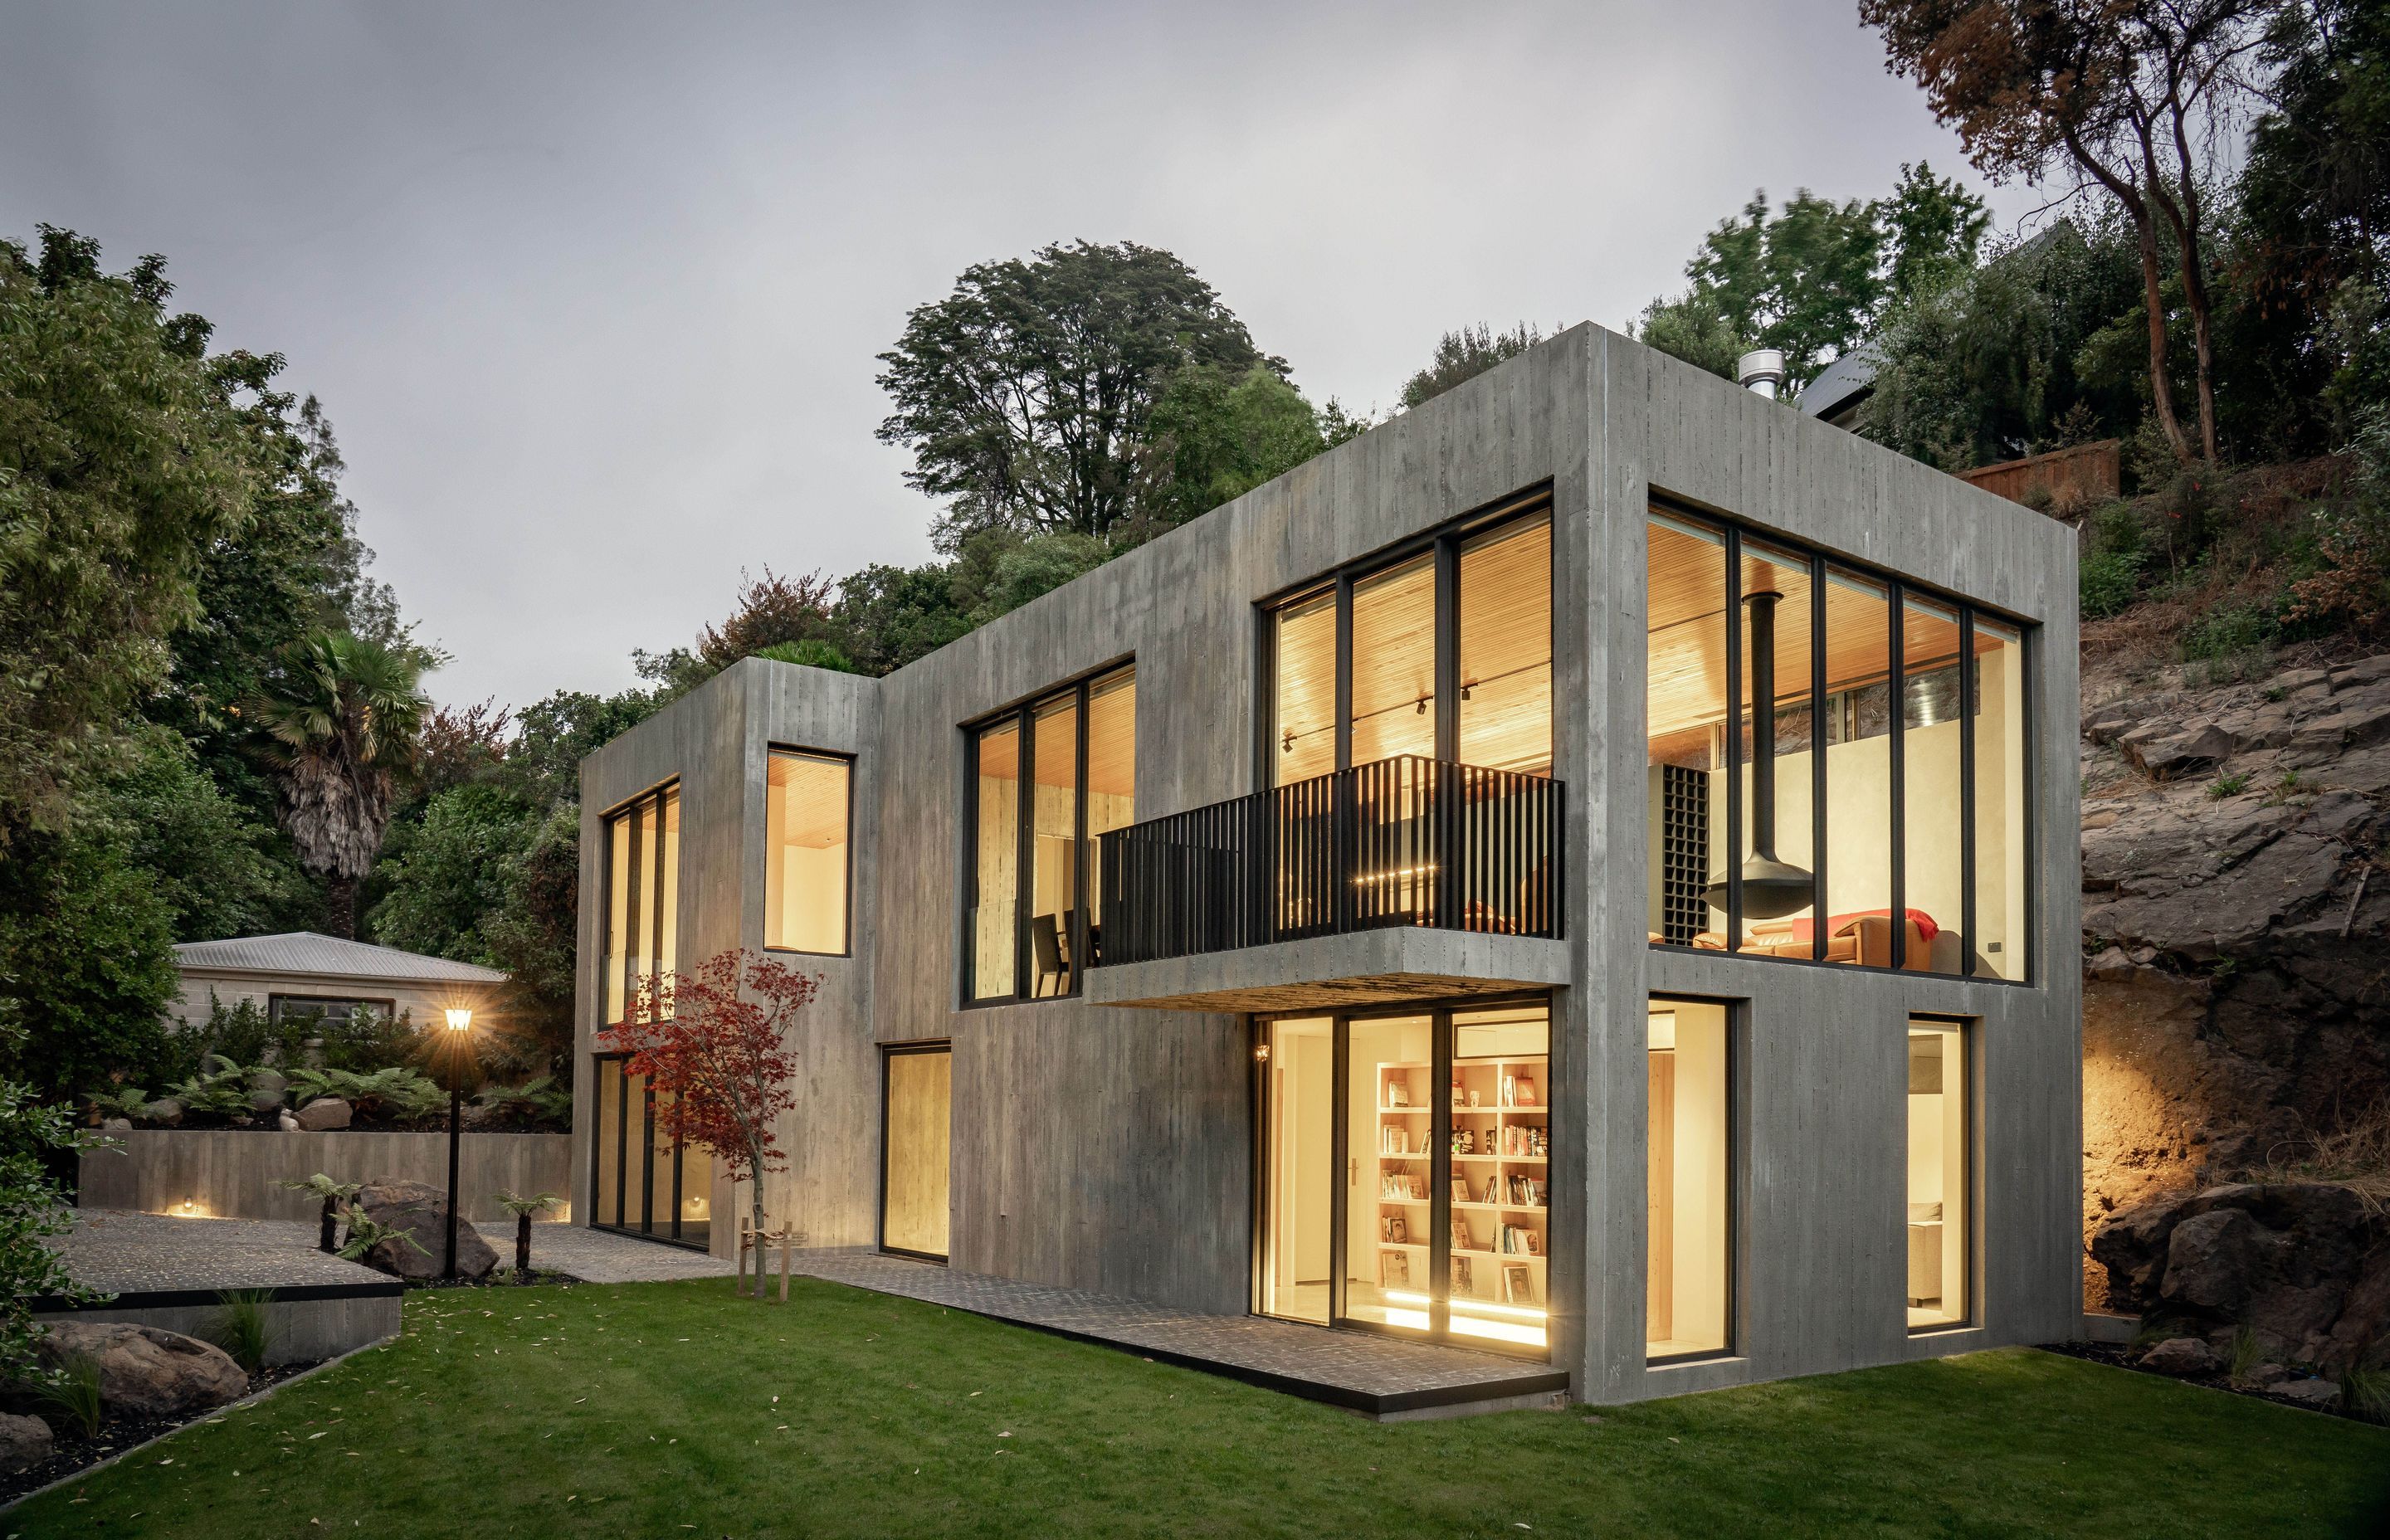 The Brutalist concrete form is punctured by full height glazing on both levels of this two-storyed home.